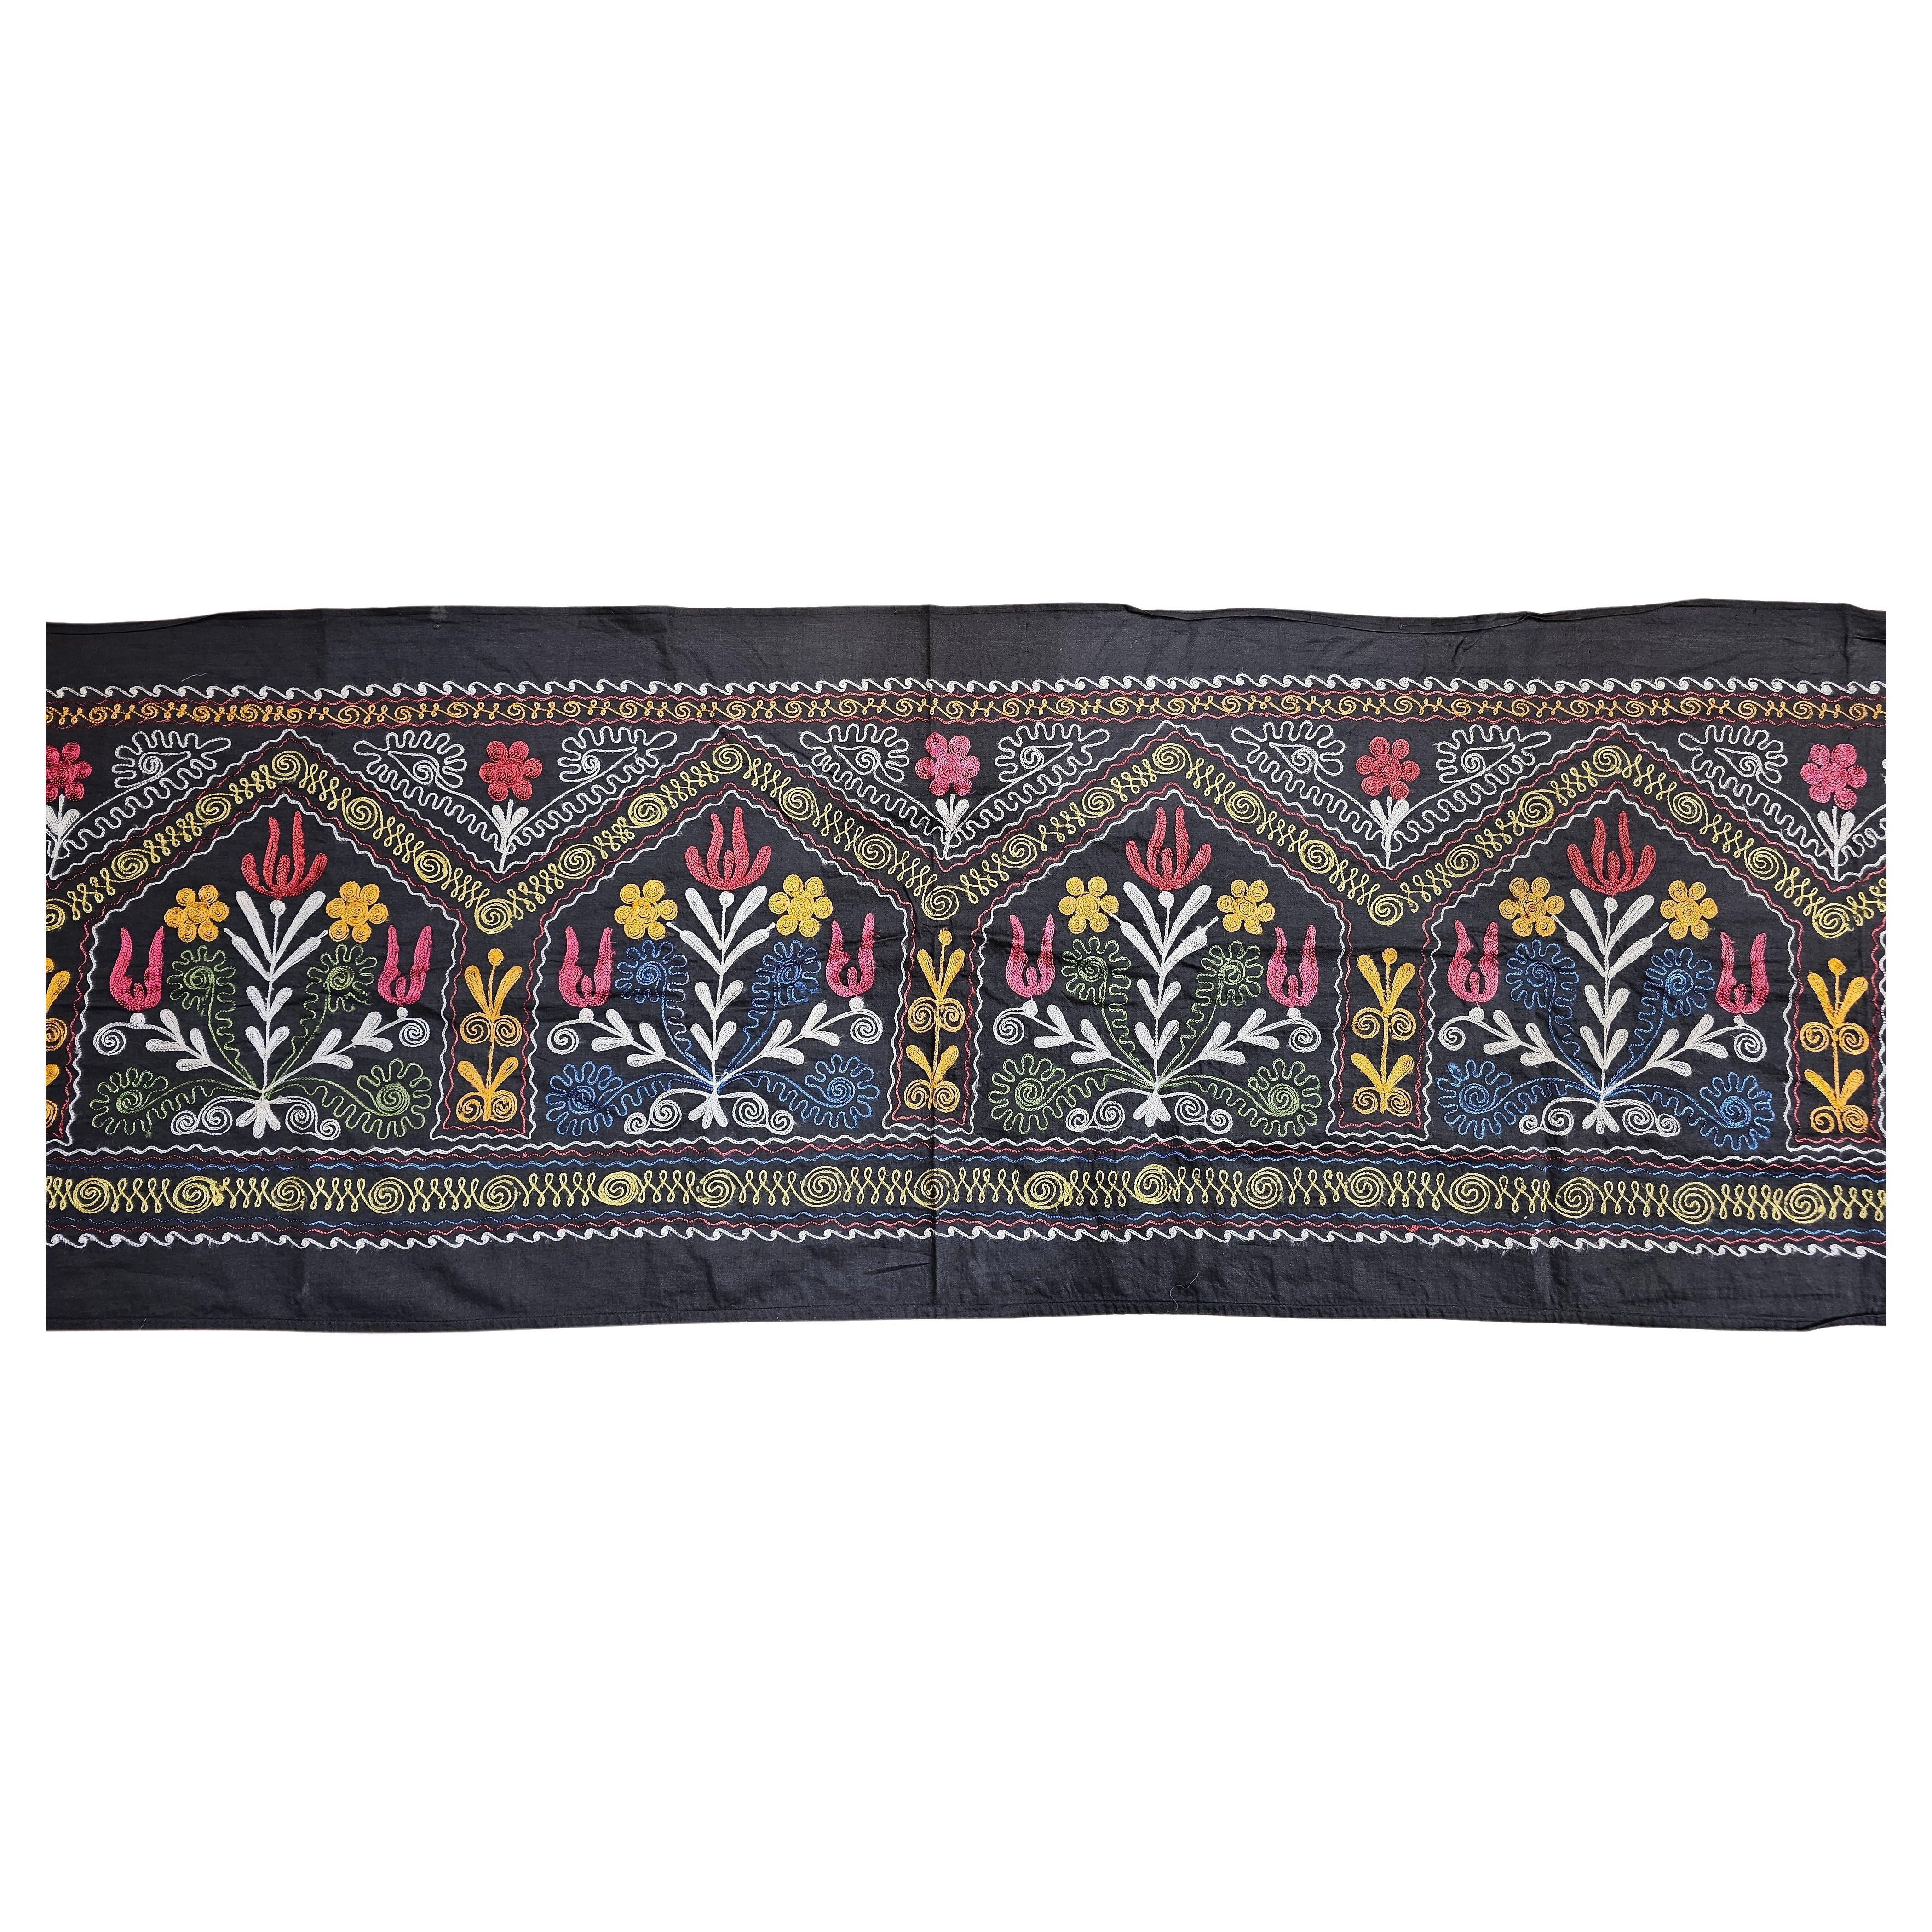 Vintage hand-crafted Suzani silk embroidery from Uzbekistan in Central Asia in black cotton background and designs in silk in black, blue, green, ivory, yellow, and red.  The design of each panel consists of finely silk embroidered floral patterns